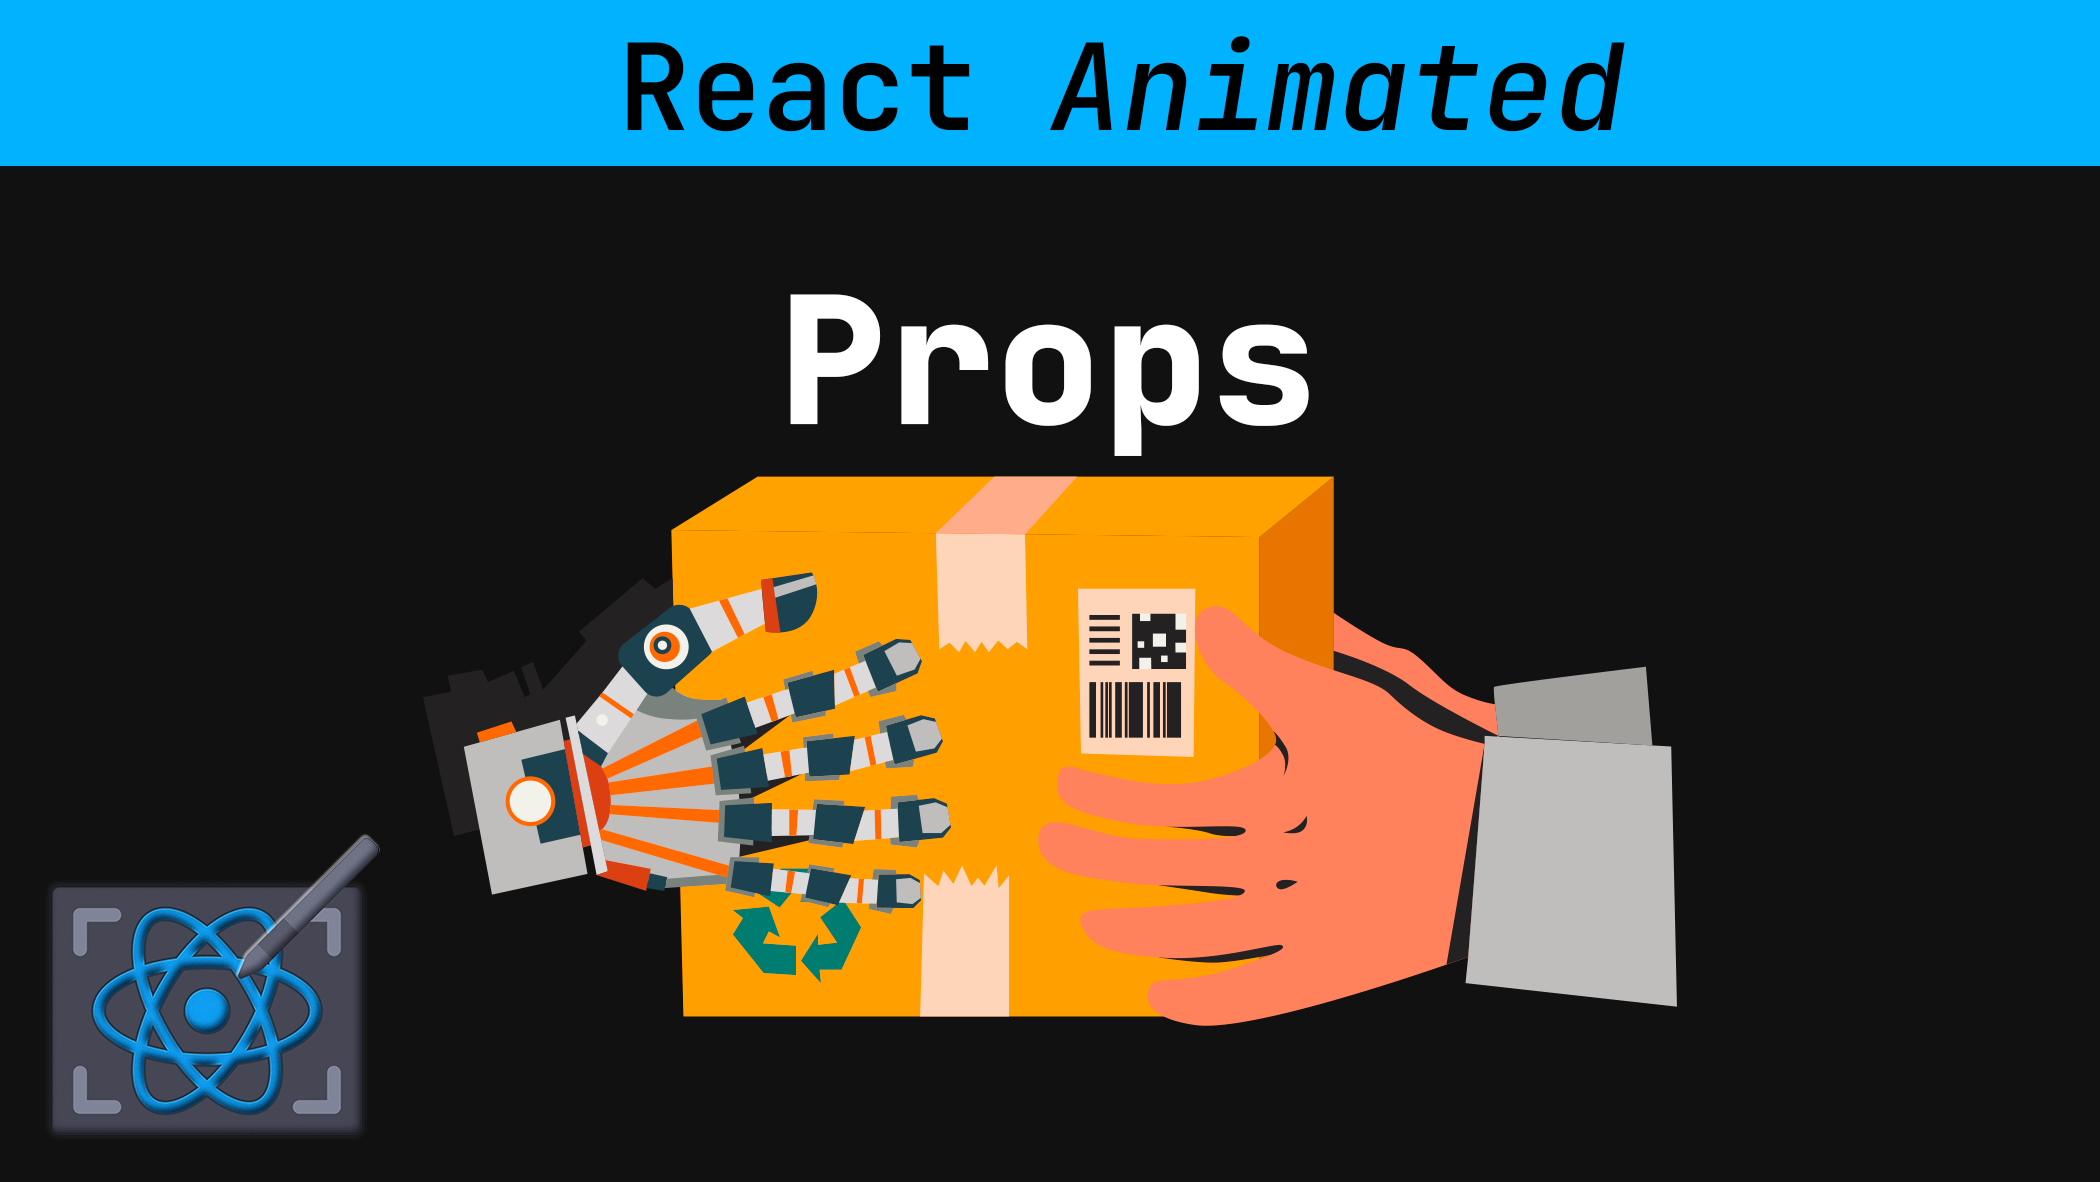 Learn React Props – The Animated Guide